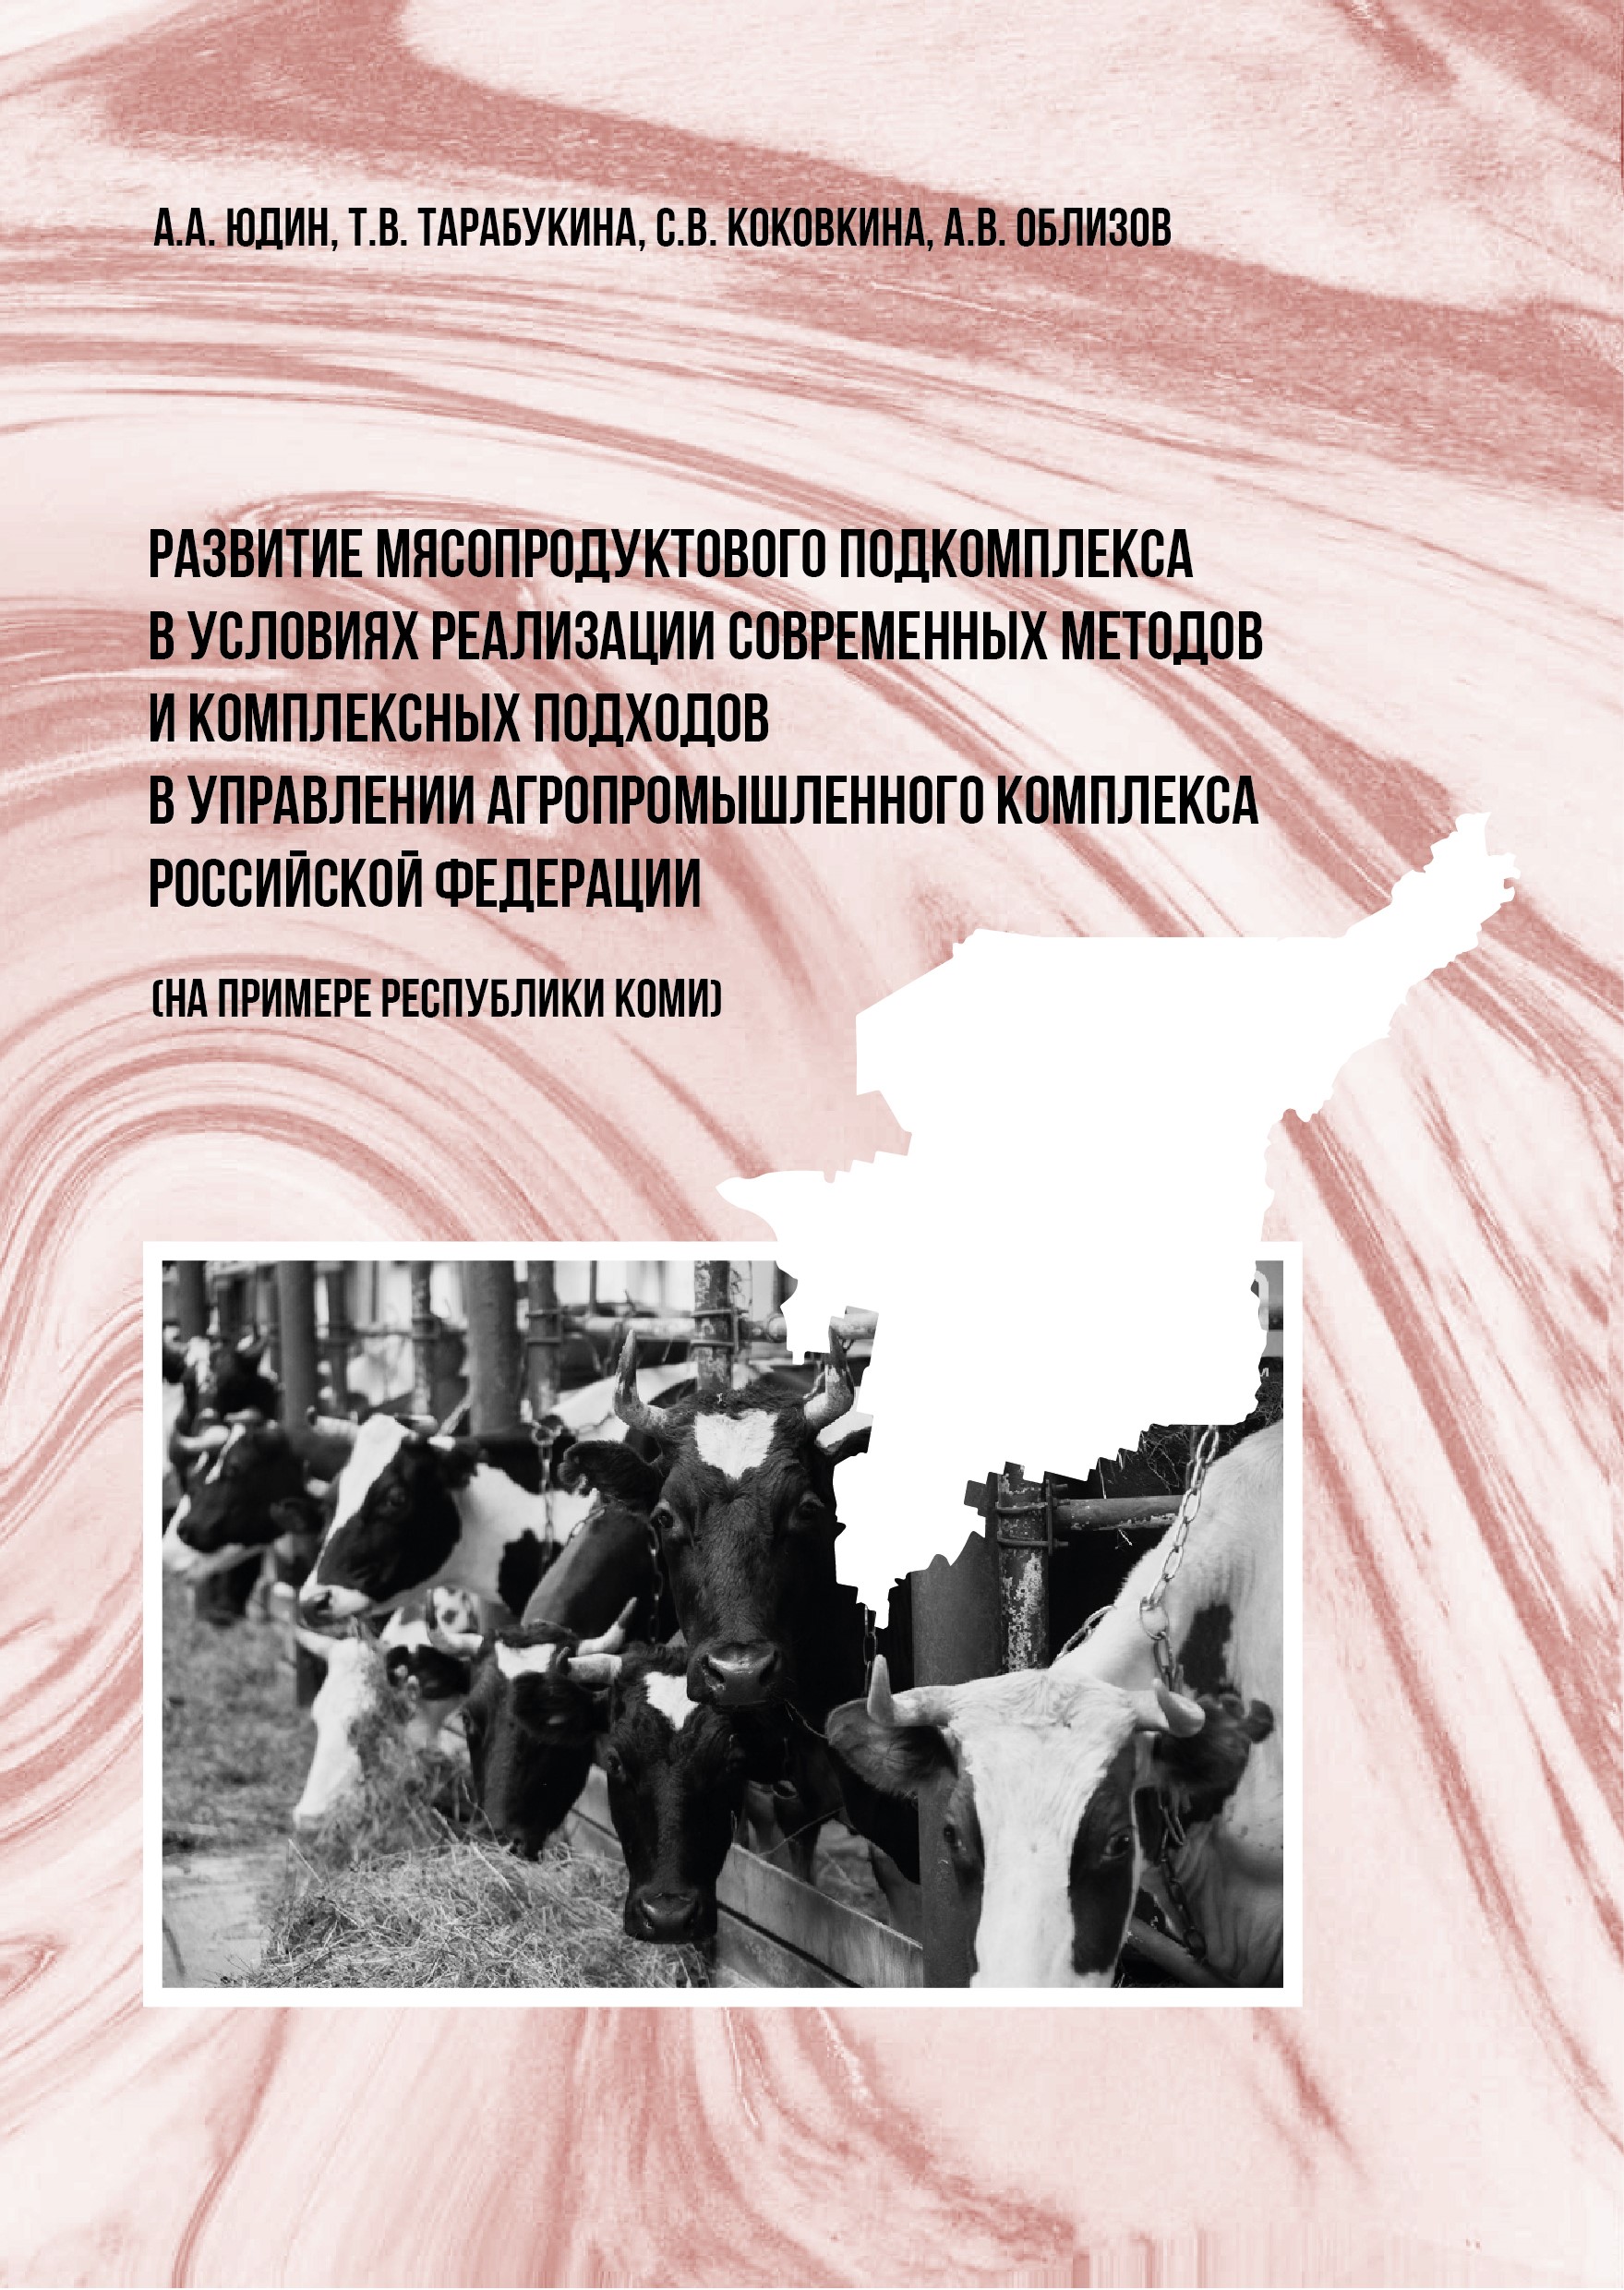                         Development of a  meat-product subcomplex in the conditions of implementation of modern methods  and integrated approaches to the management of the agro-industrial complex of the  Russian Federation (on example of the Komi Republic)
            